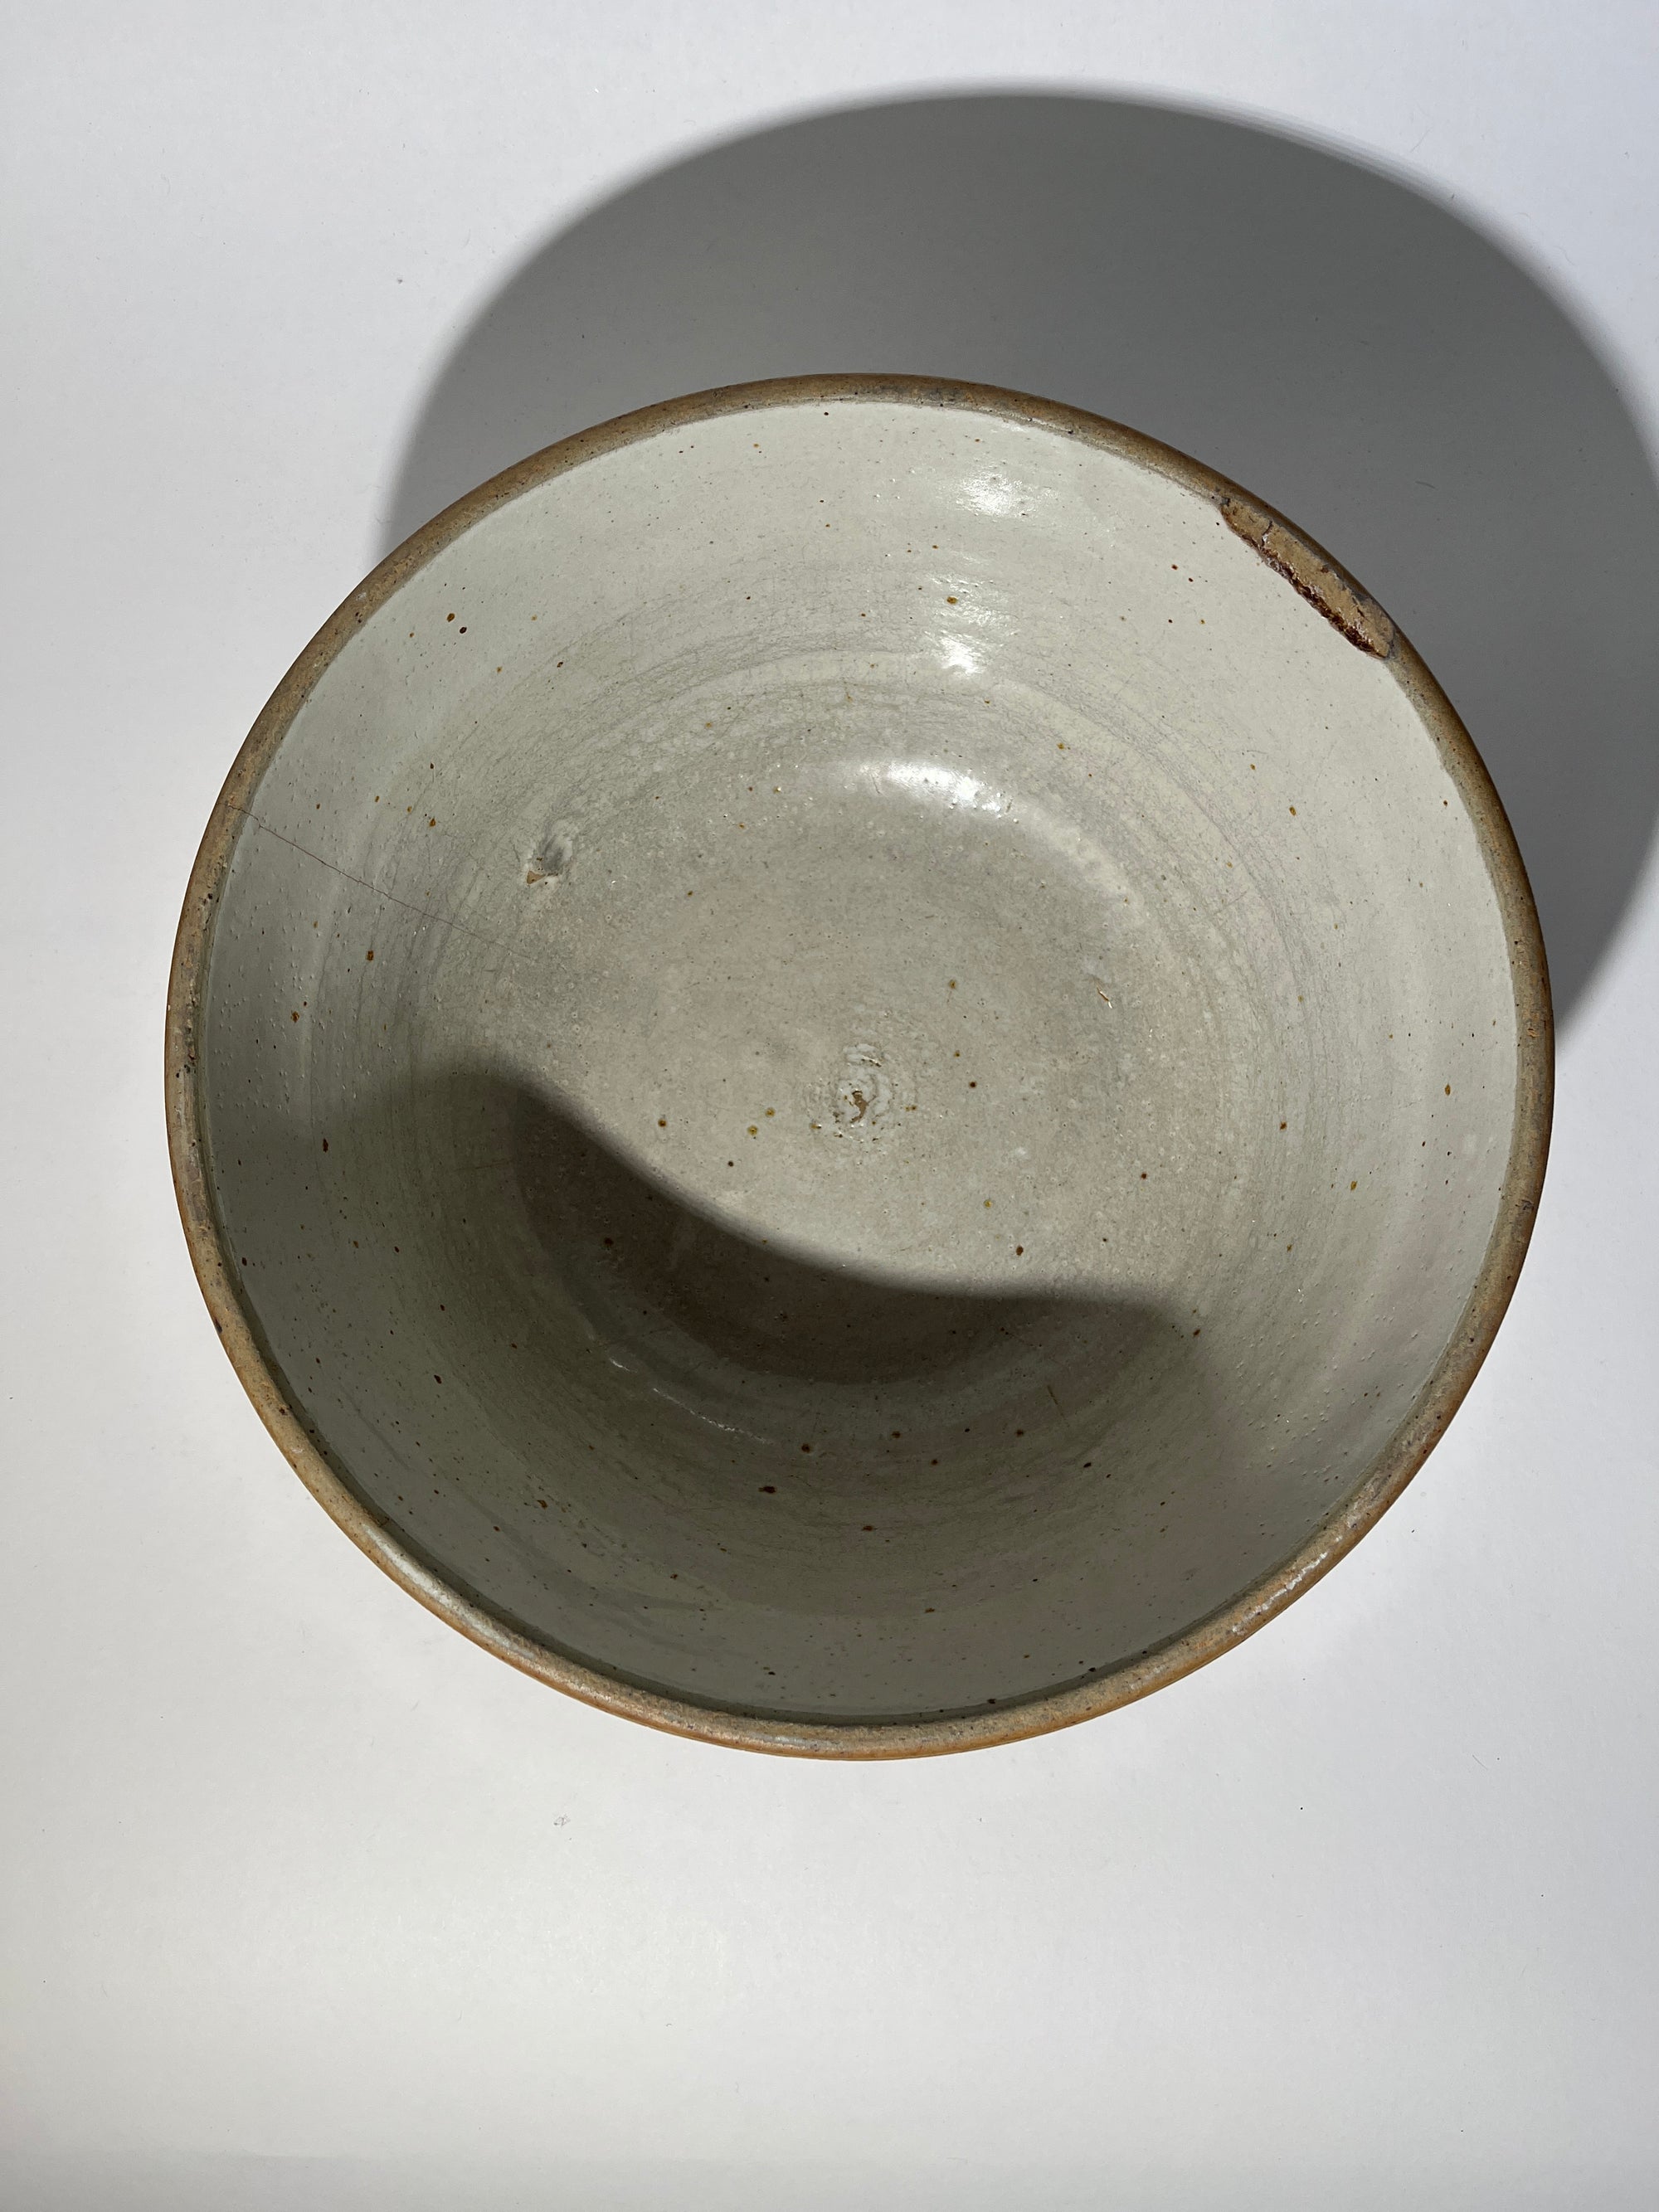 Speckled Gray Large Bowl